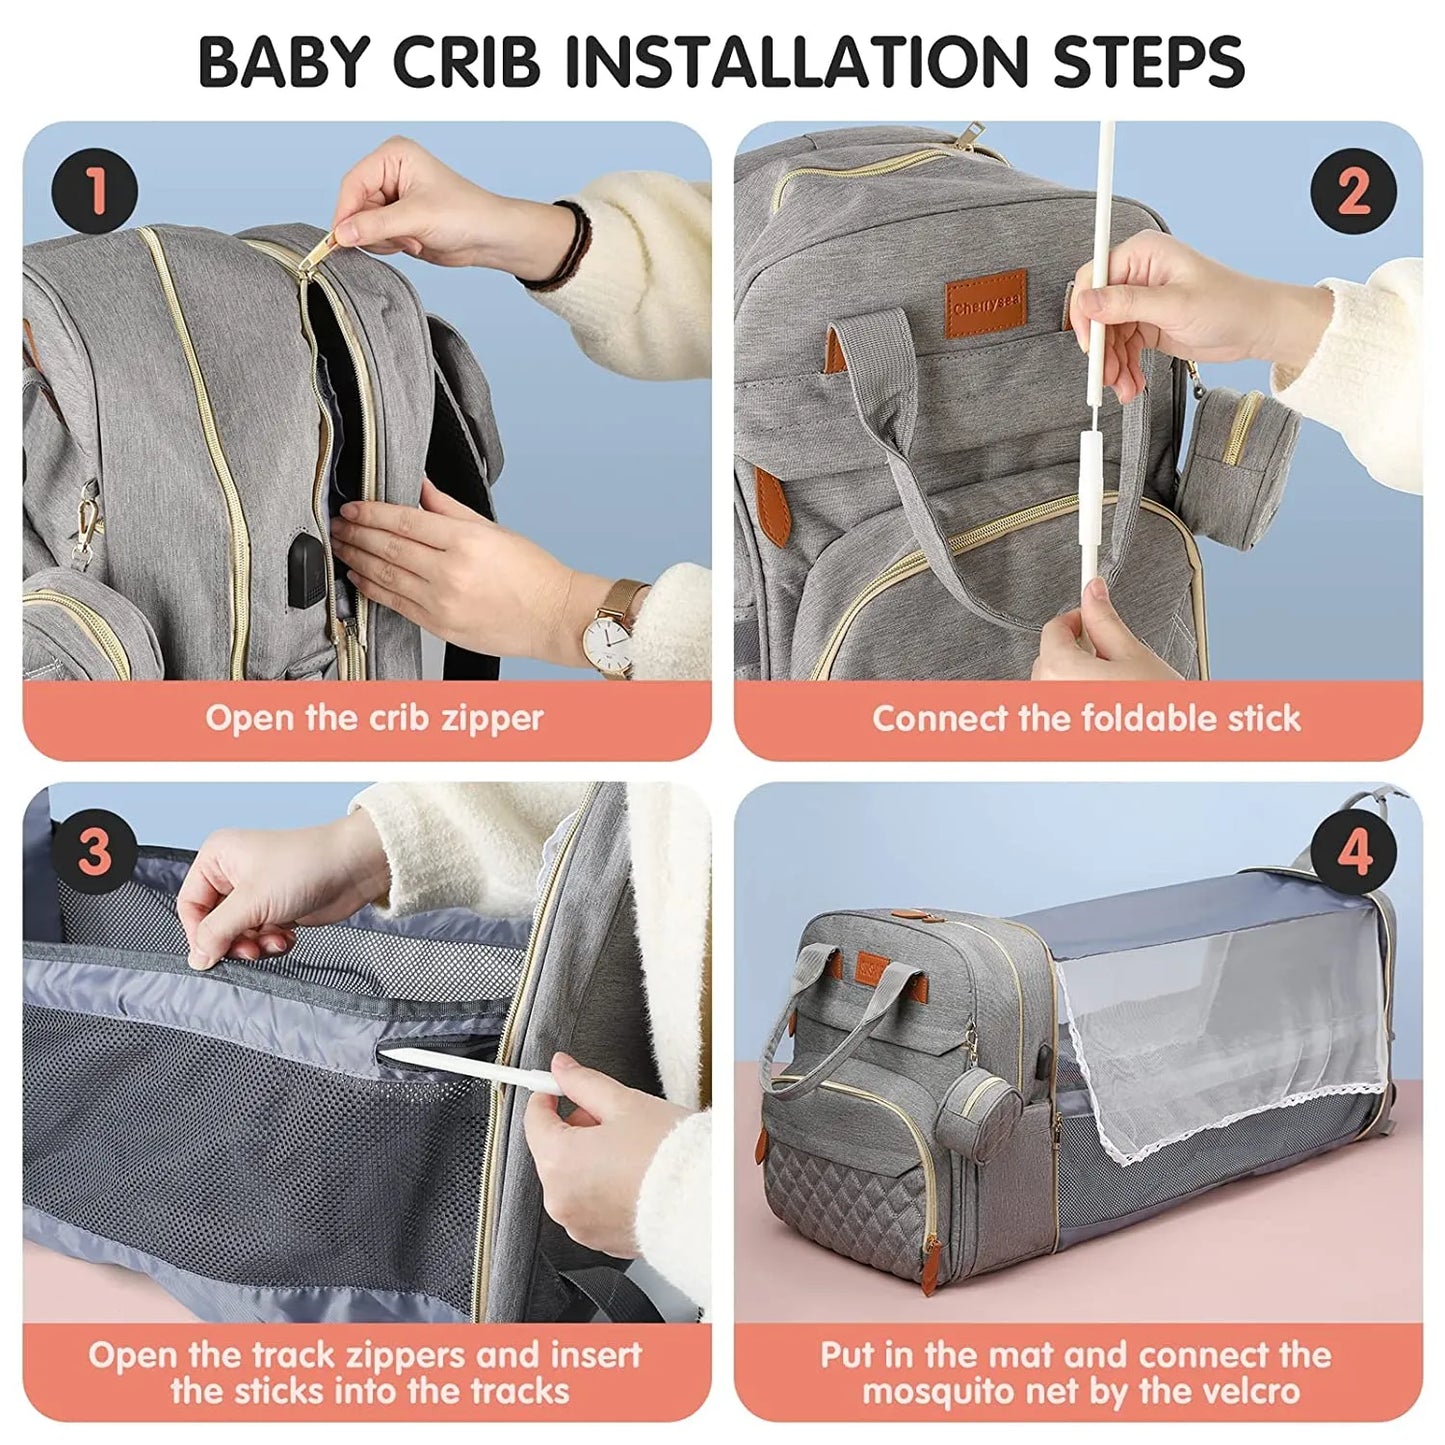 3 In 1 Diaper Bag Backpack Foldable Baby Bed Waterproof Travel Bag with USB Charging Port